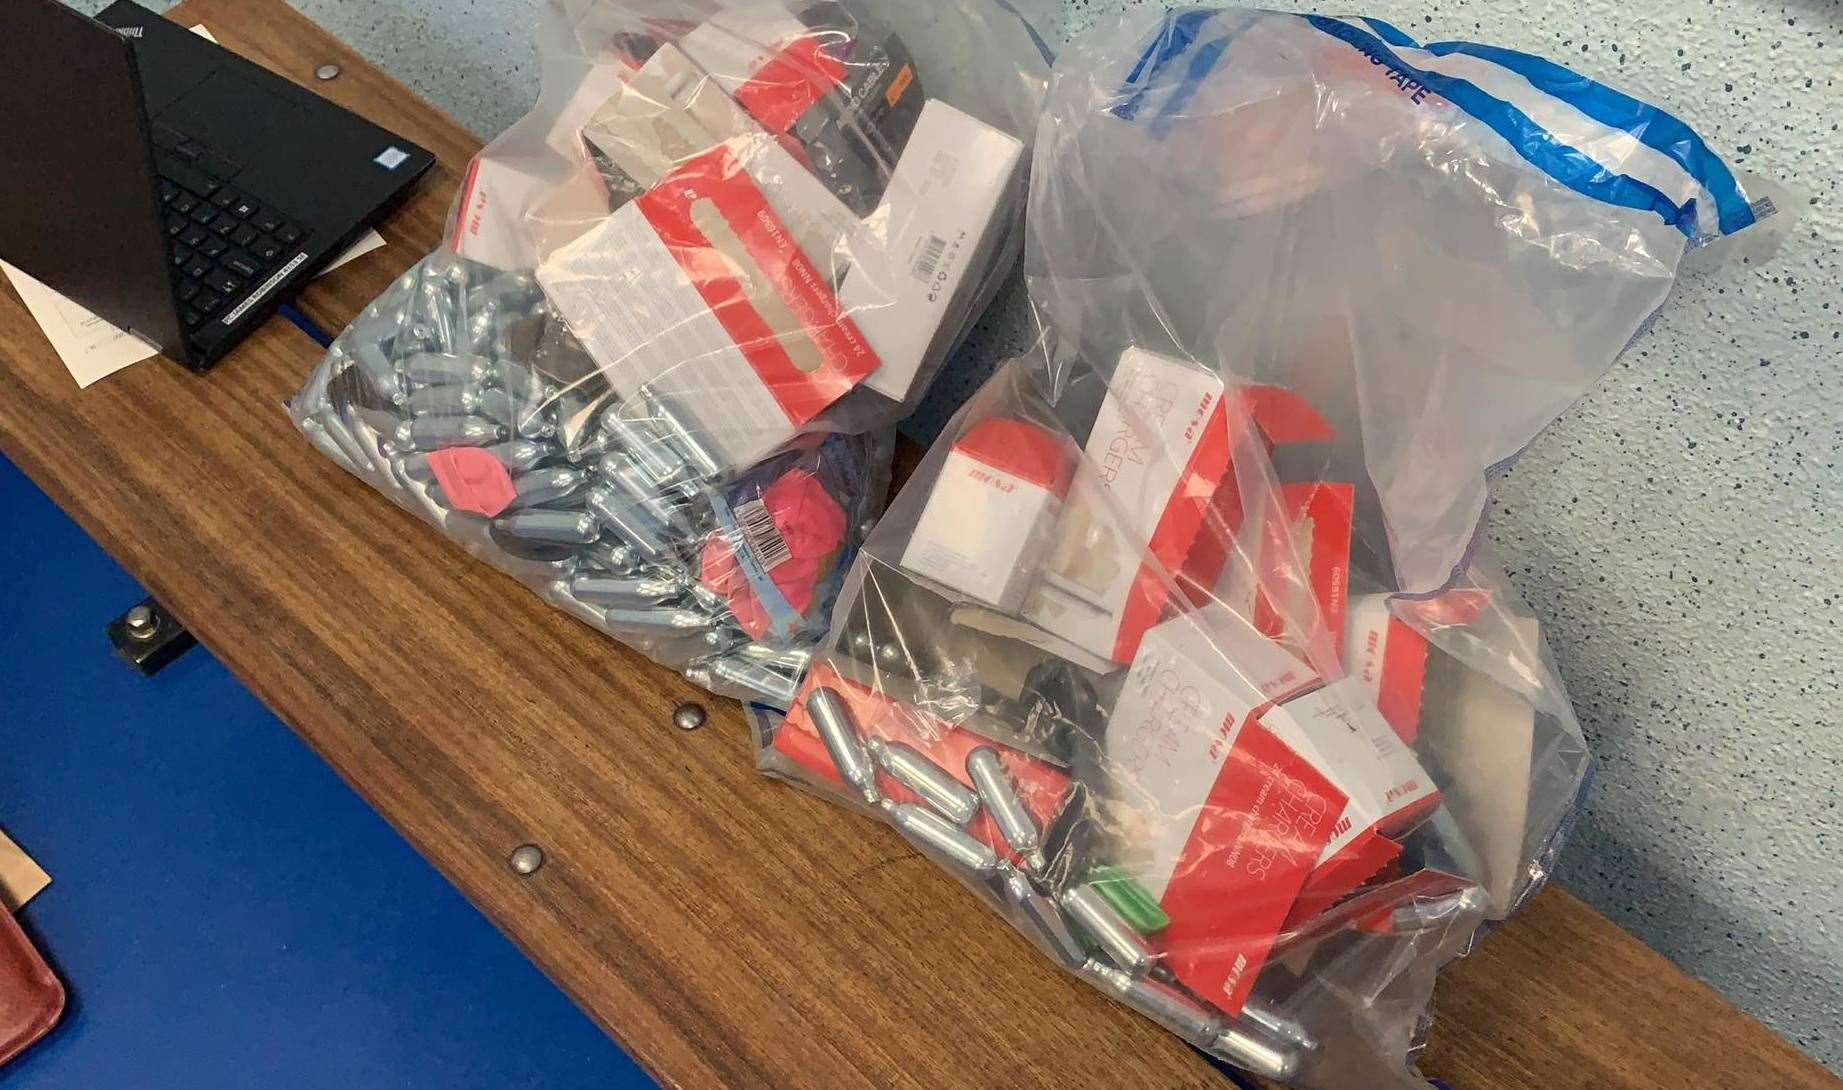 Police seized more than 1000 nitrous oxide cannisters from a vehicle Photo: Welling Police